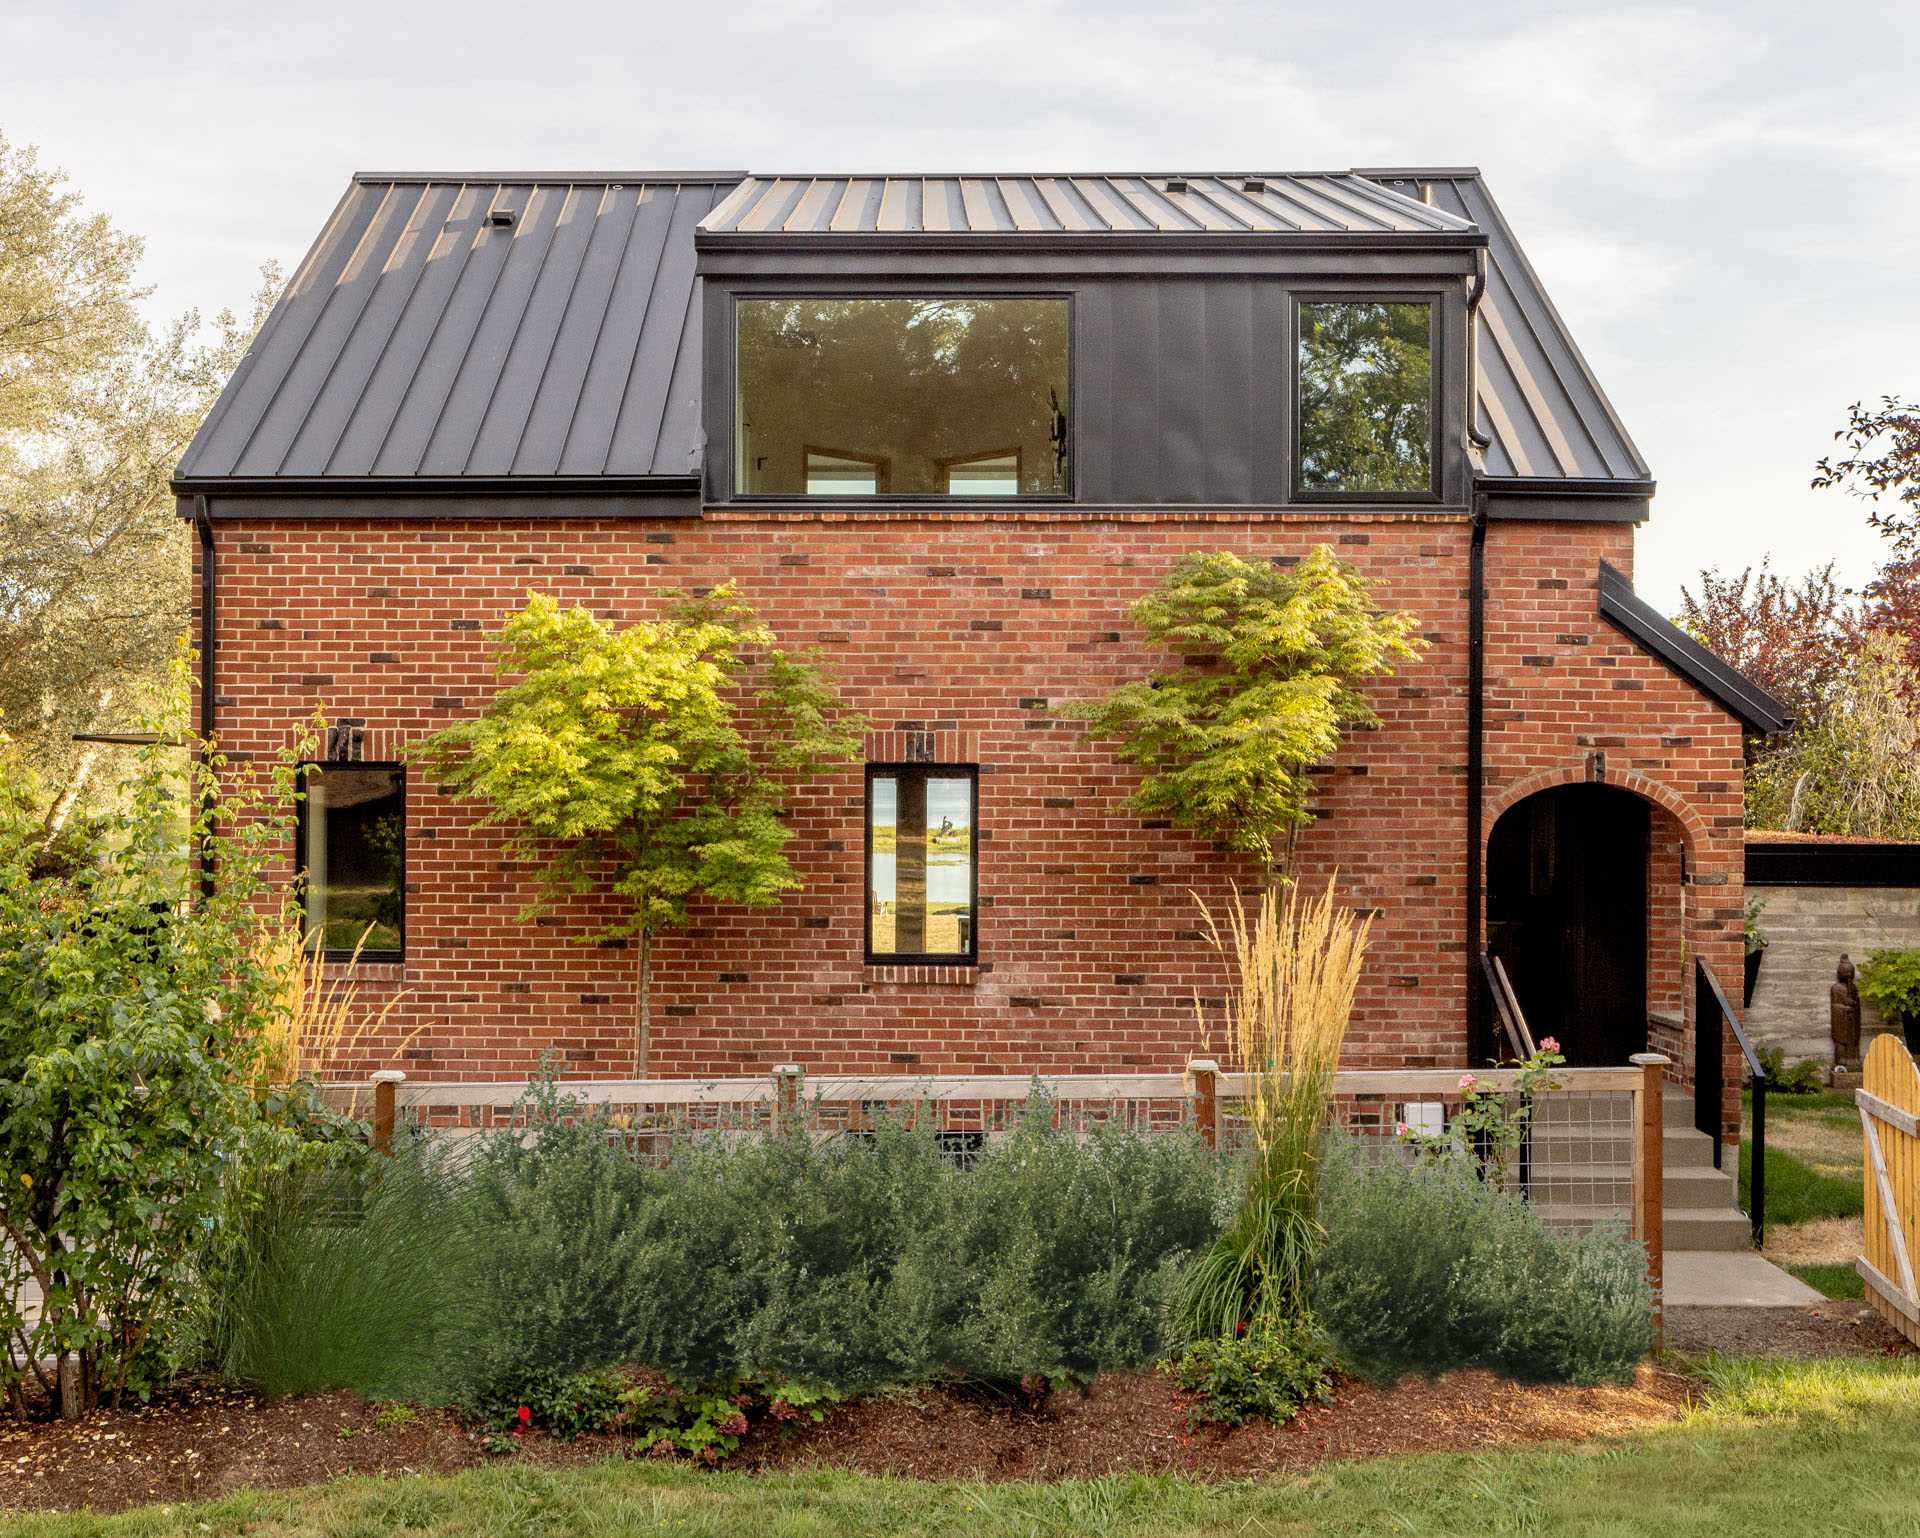 An updated brick home with new windows and a side entrance.